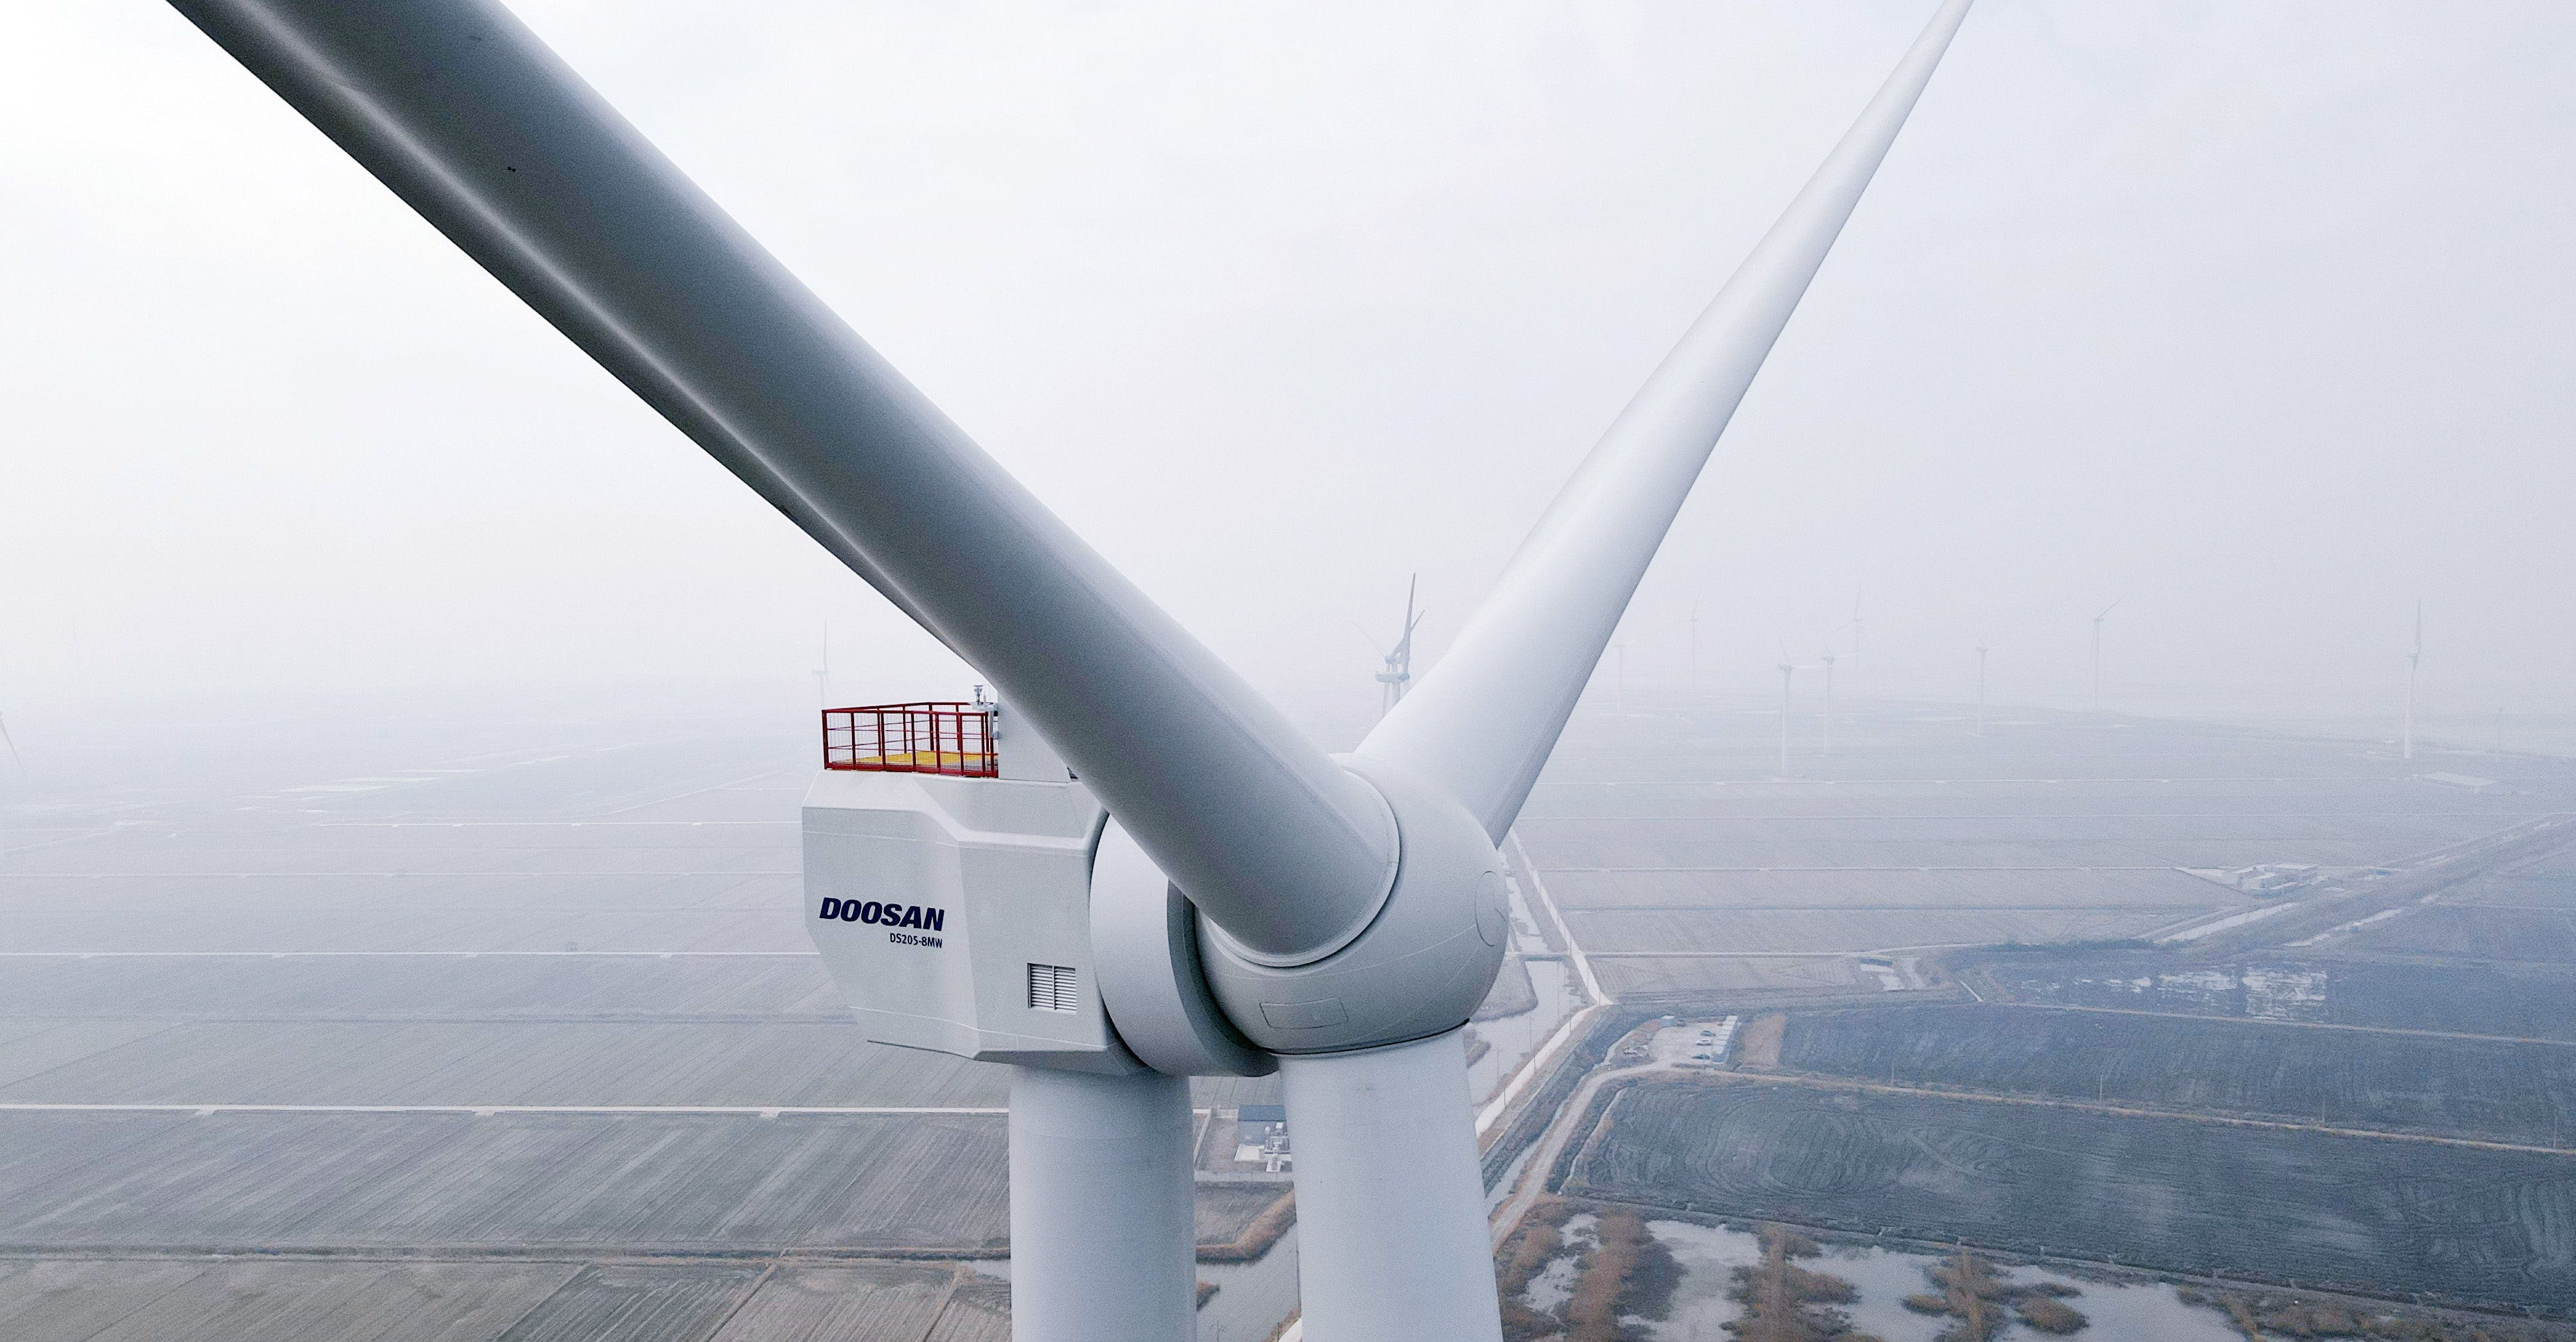 Photo 1, 2. View of the 8MW Offshore Wind Turbine implemented by Doosan Heavy at the Korea Wind Power Demonstration Center in Baeksu, Yeonggwang of South Jeolla Province.